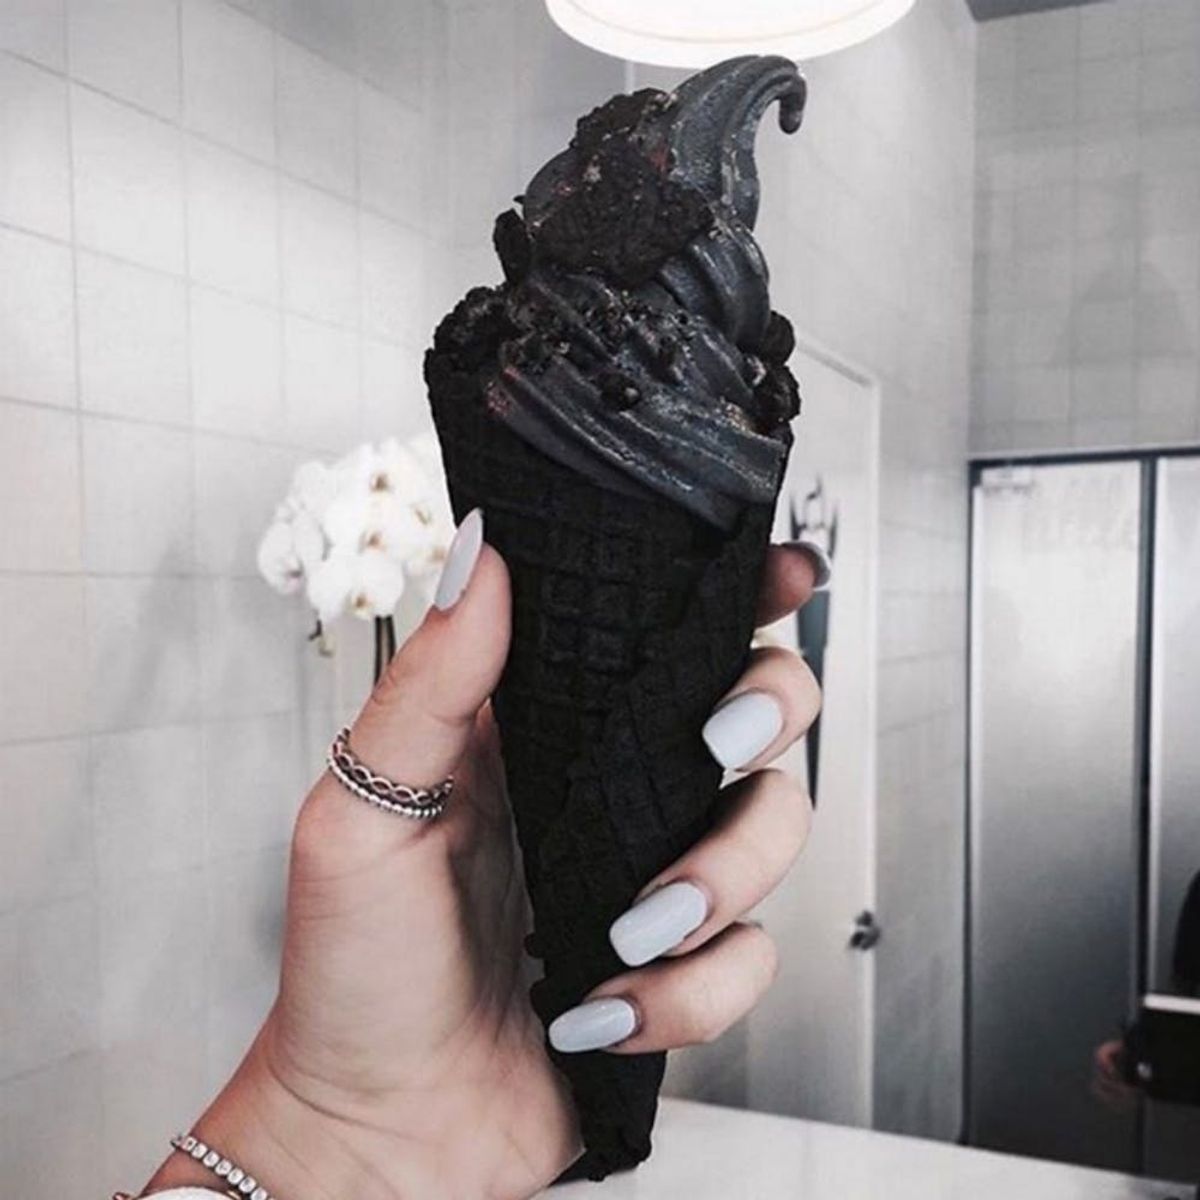 Goth Ice Cream Cones Are Here to Cure Your Unicorn and Rainbow Fetish